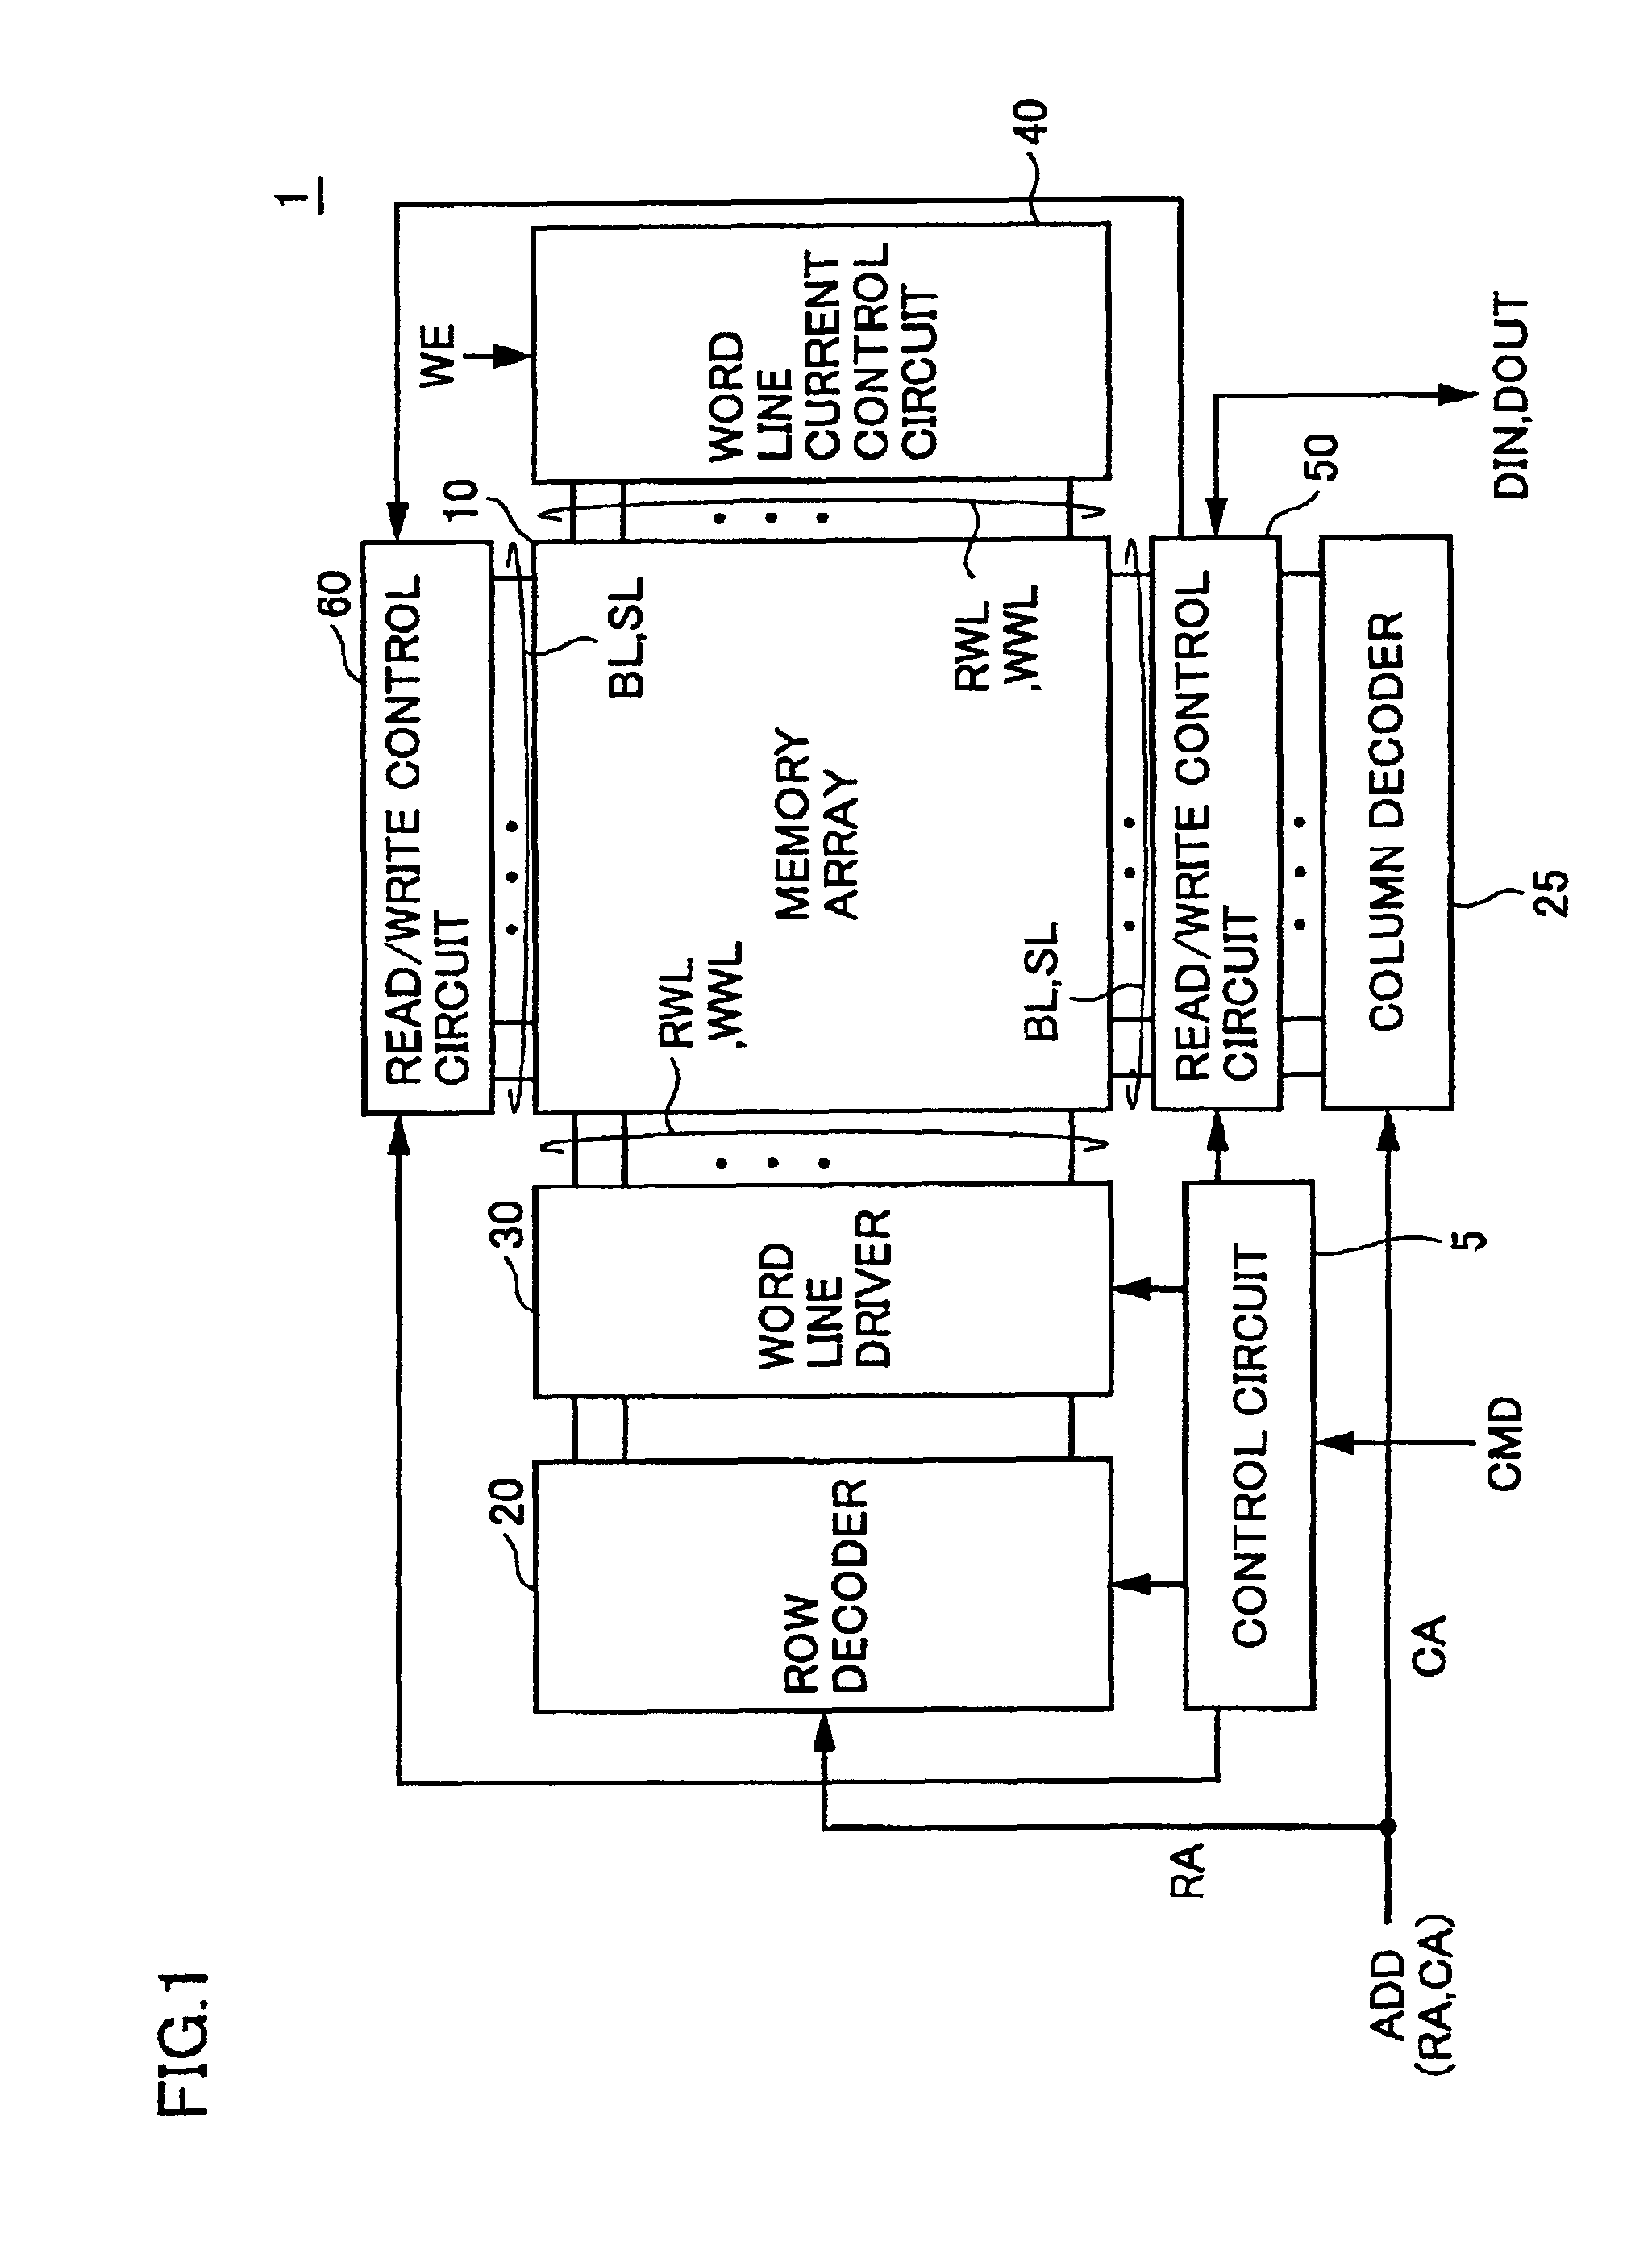 Thin film magnetic memory device having a magnetic tunnel junction